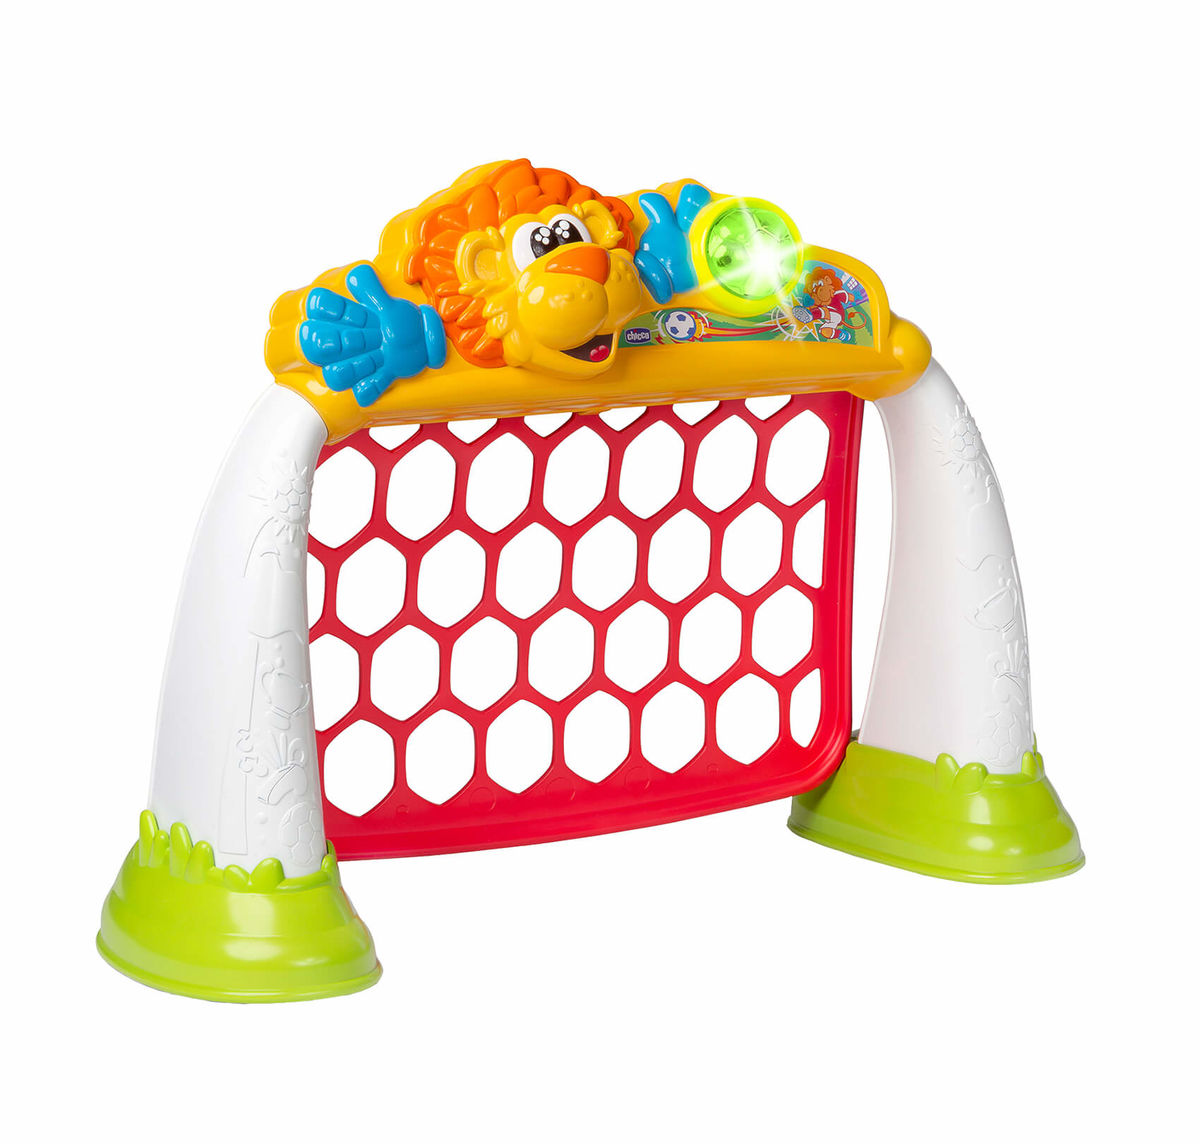 Image of Chicco Fit & Fun Goal League Pro Spielzeug bei nettoshop.ch